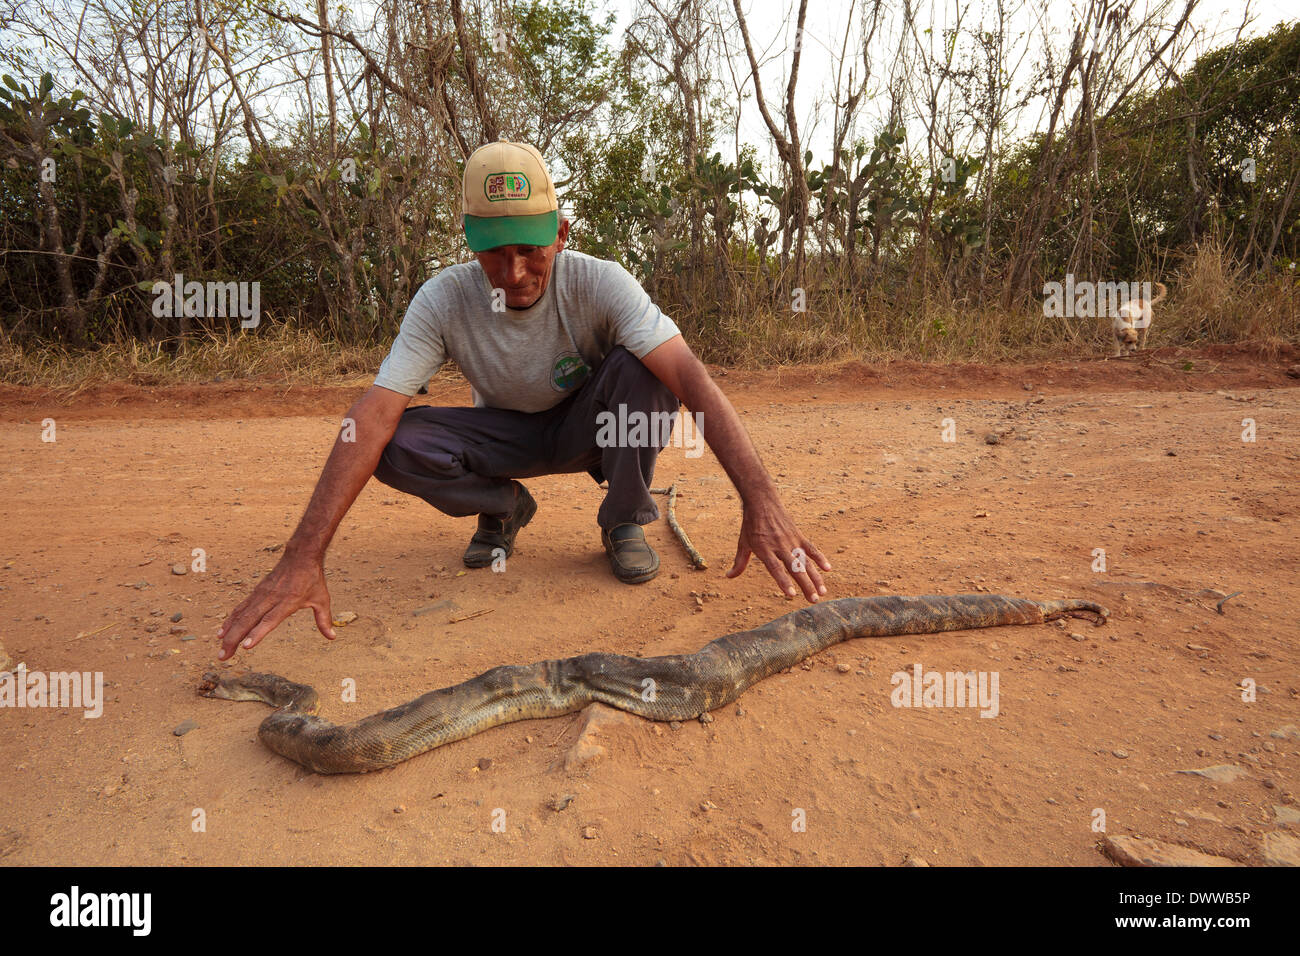 Panamanian man with a road-killed Boa Constrictor snake in Sarigua national park, Herrera province, Republic of Panama. Stock Photo